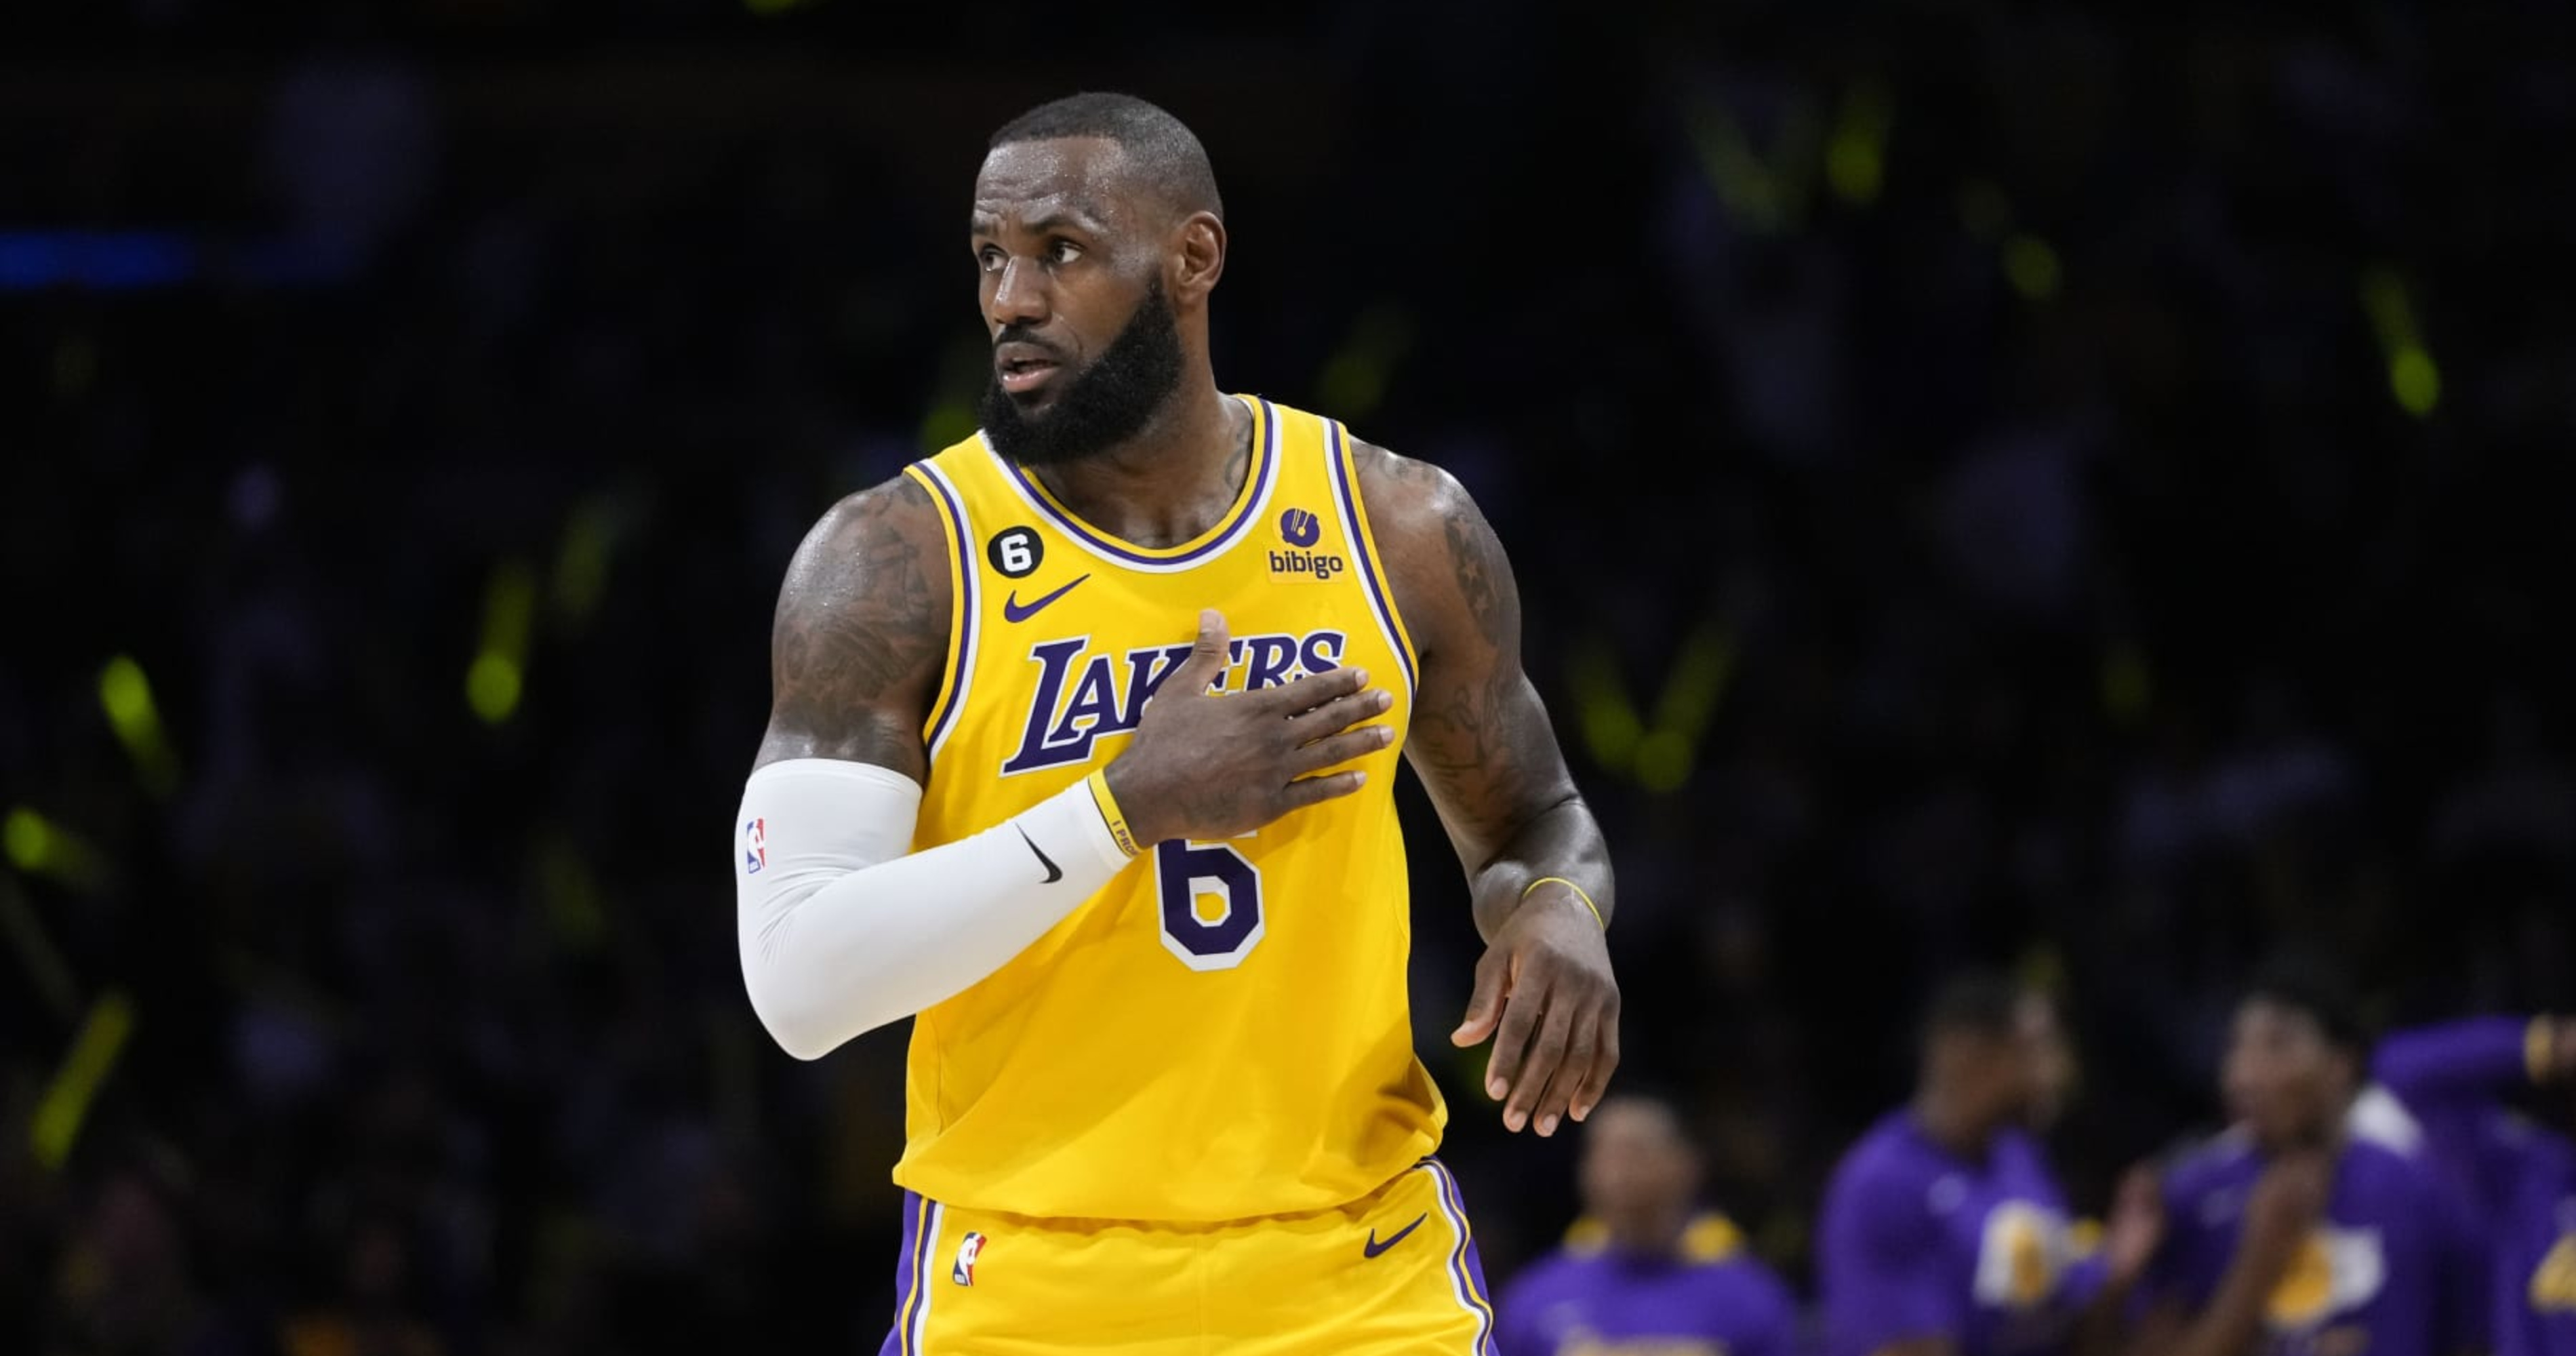 Grizzlies: Lakers, LeBron James on Memphis schedule twice at home